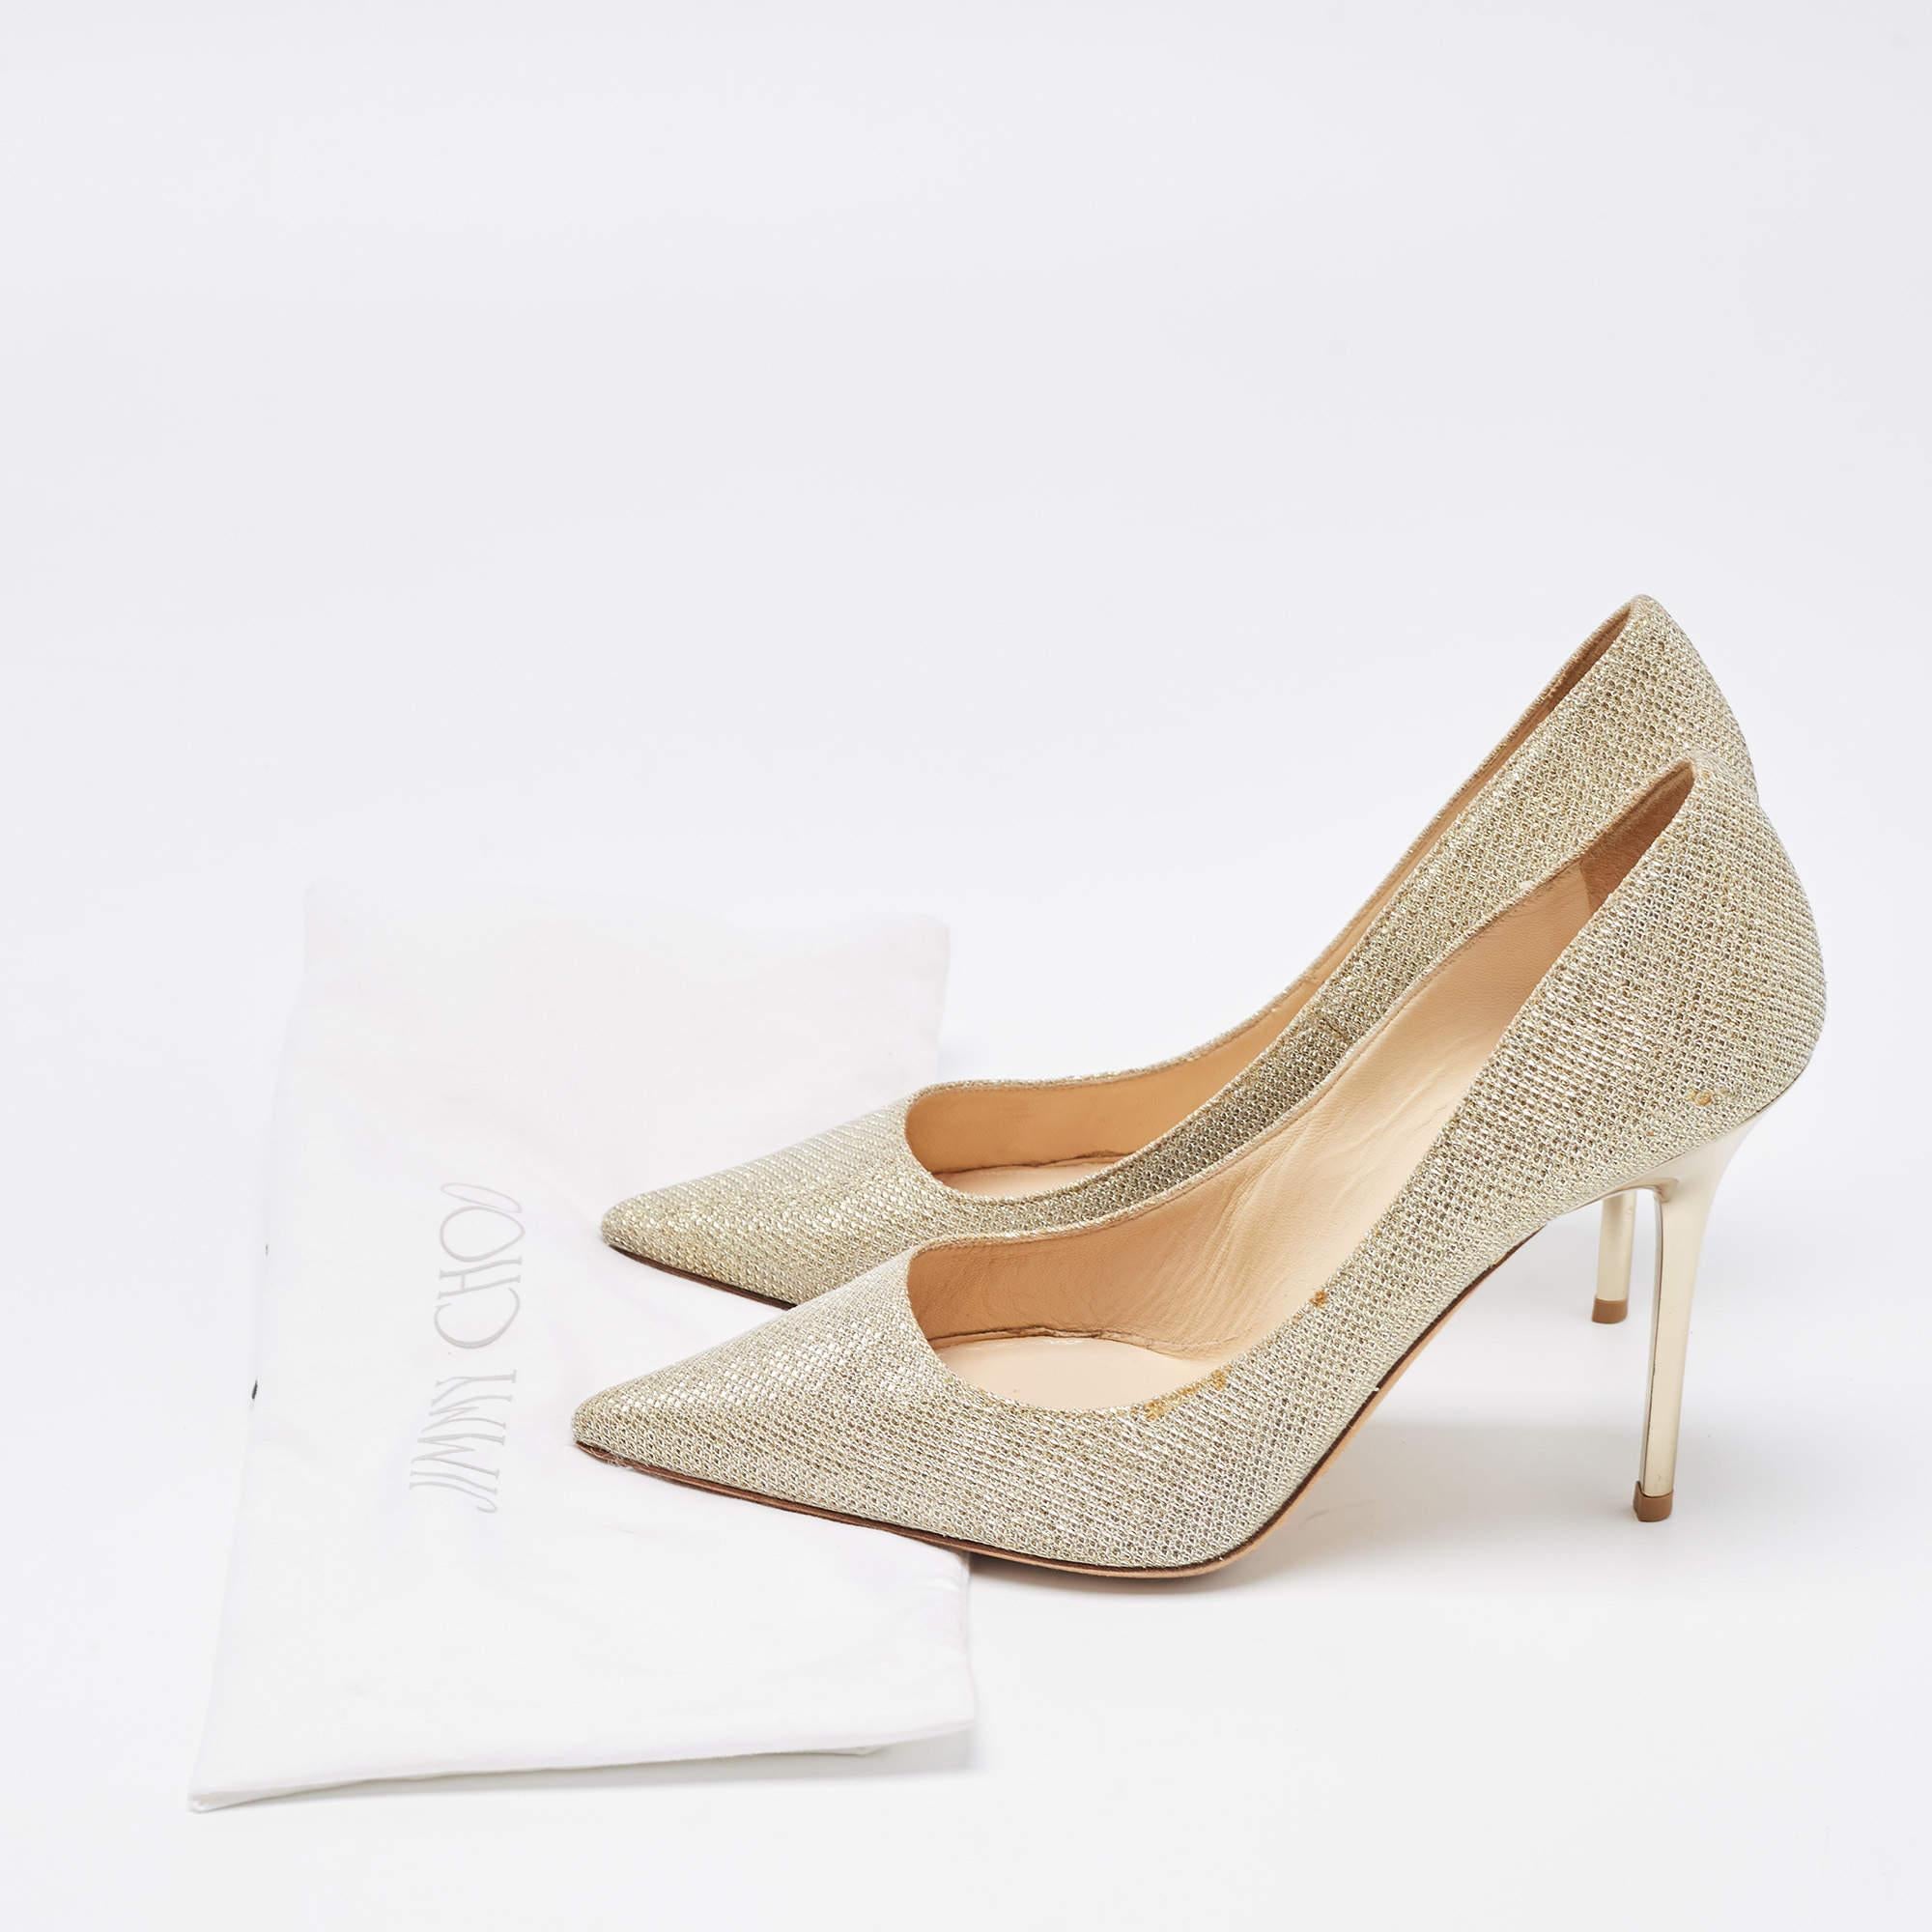 Jimmy Choo Gold Glitter Romy Pointed Toe Pumps Size 36 For Sale 5